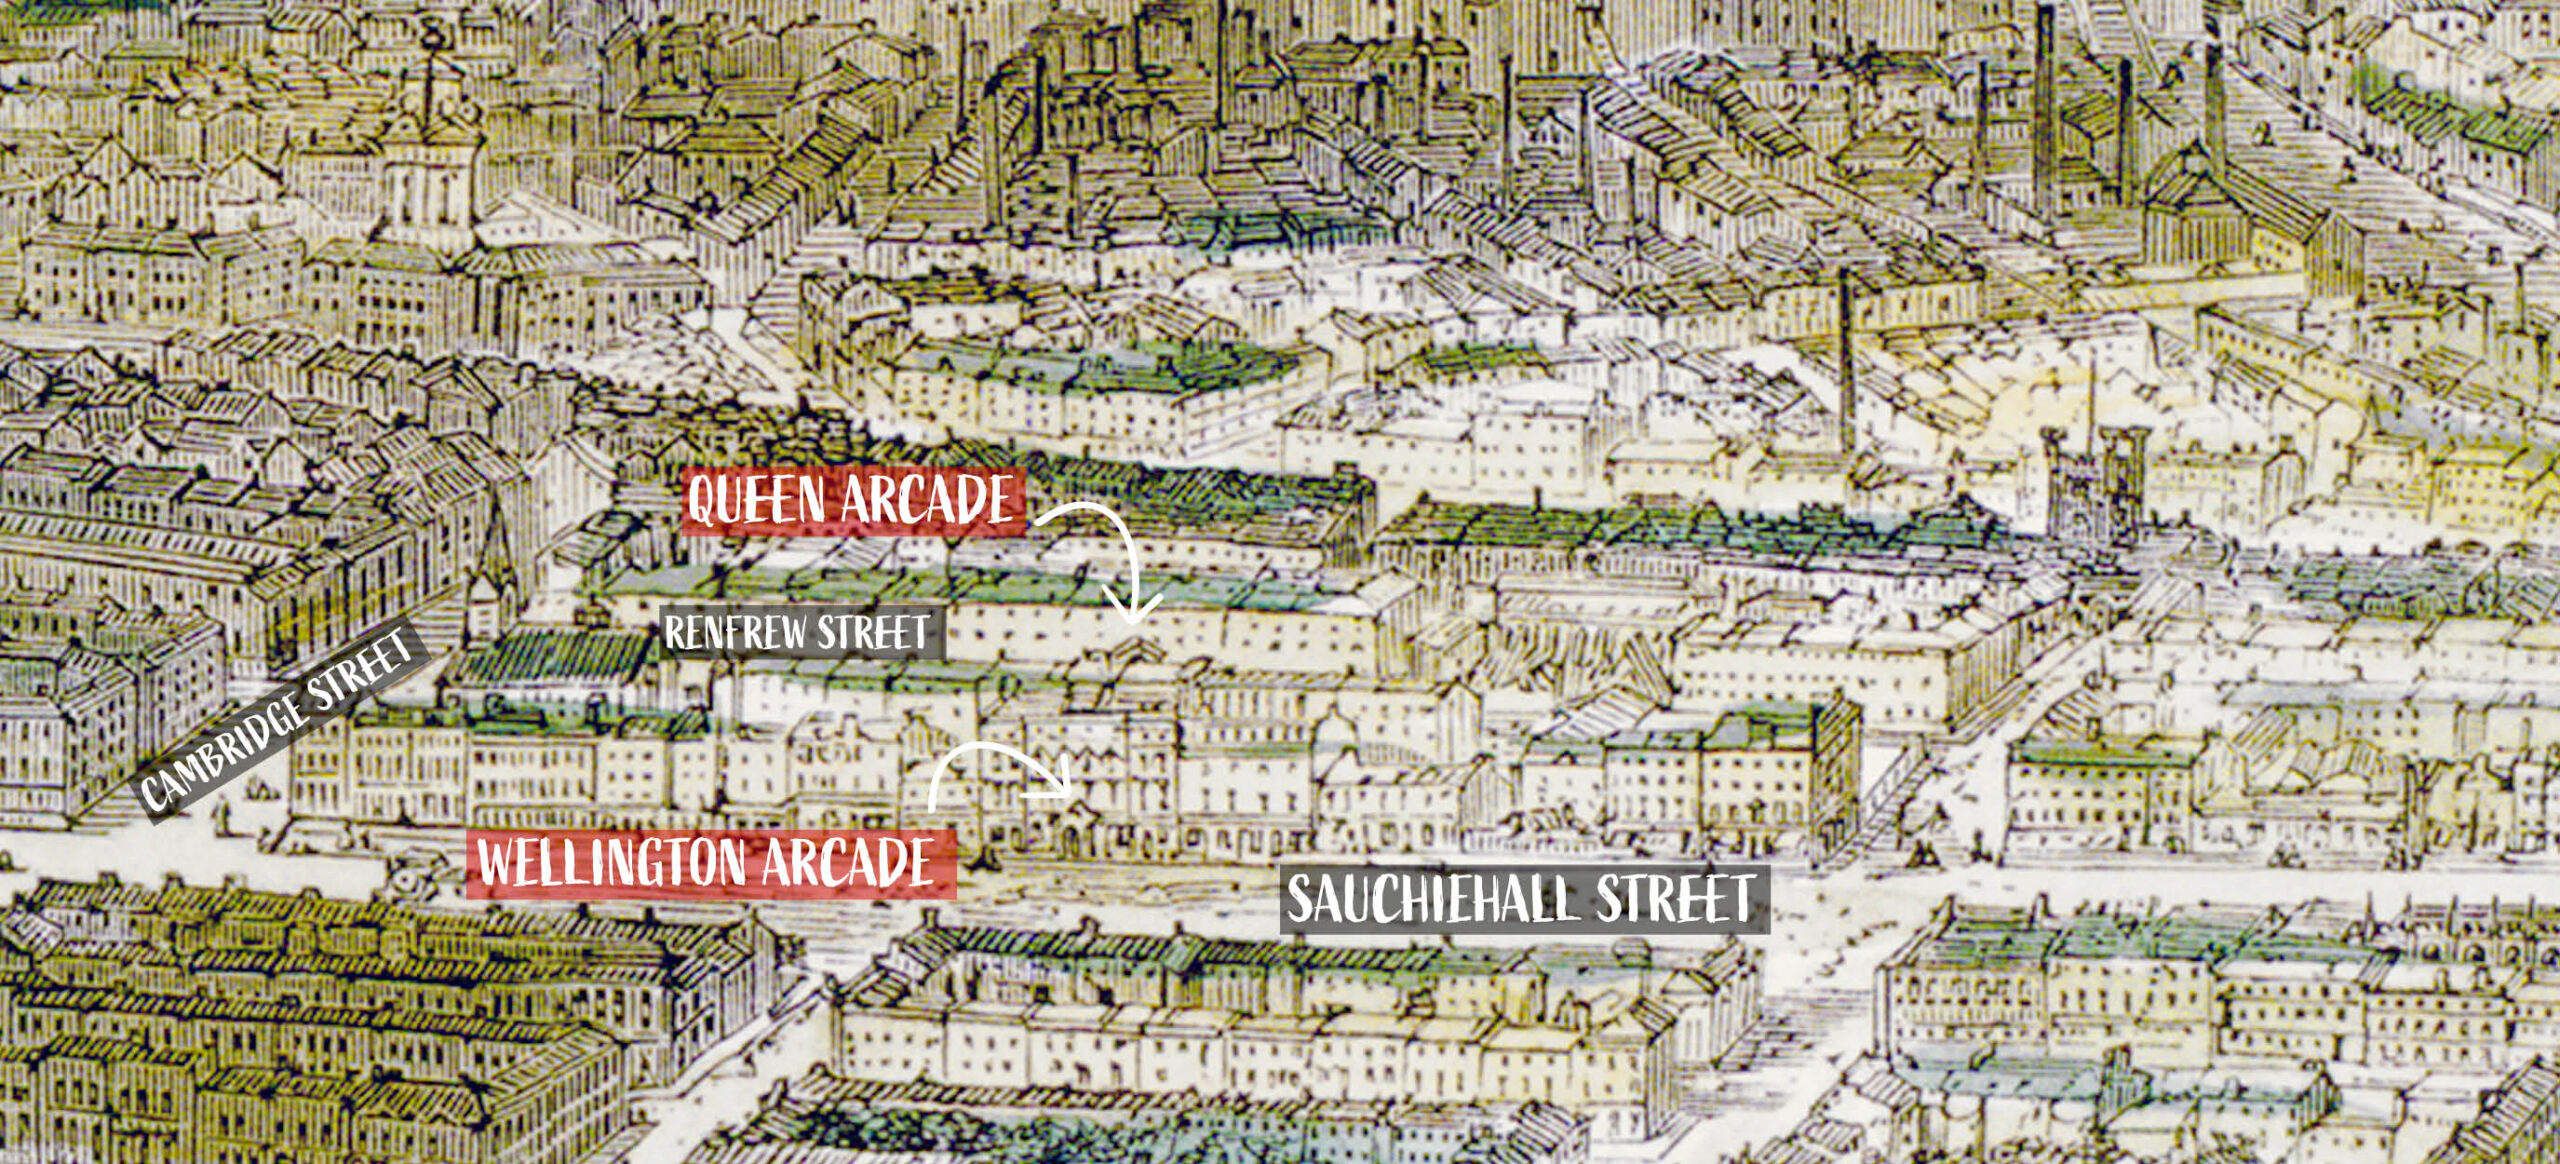 An excerpt from the highly detailed illustrated birds eye view of Glasgow 1864 by Thomas Sulman, showing Sauchiehall Street and Renfrew Street and with the Wellington and Queen Arcades marked as they run perpendicular to these streets.